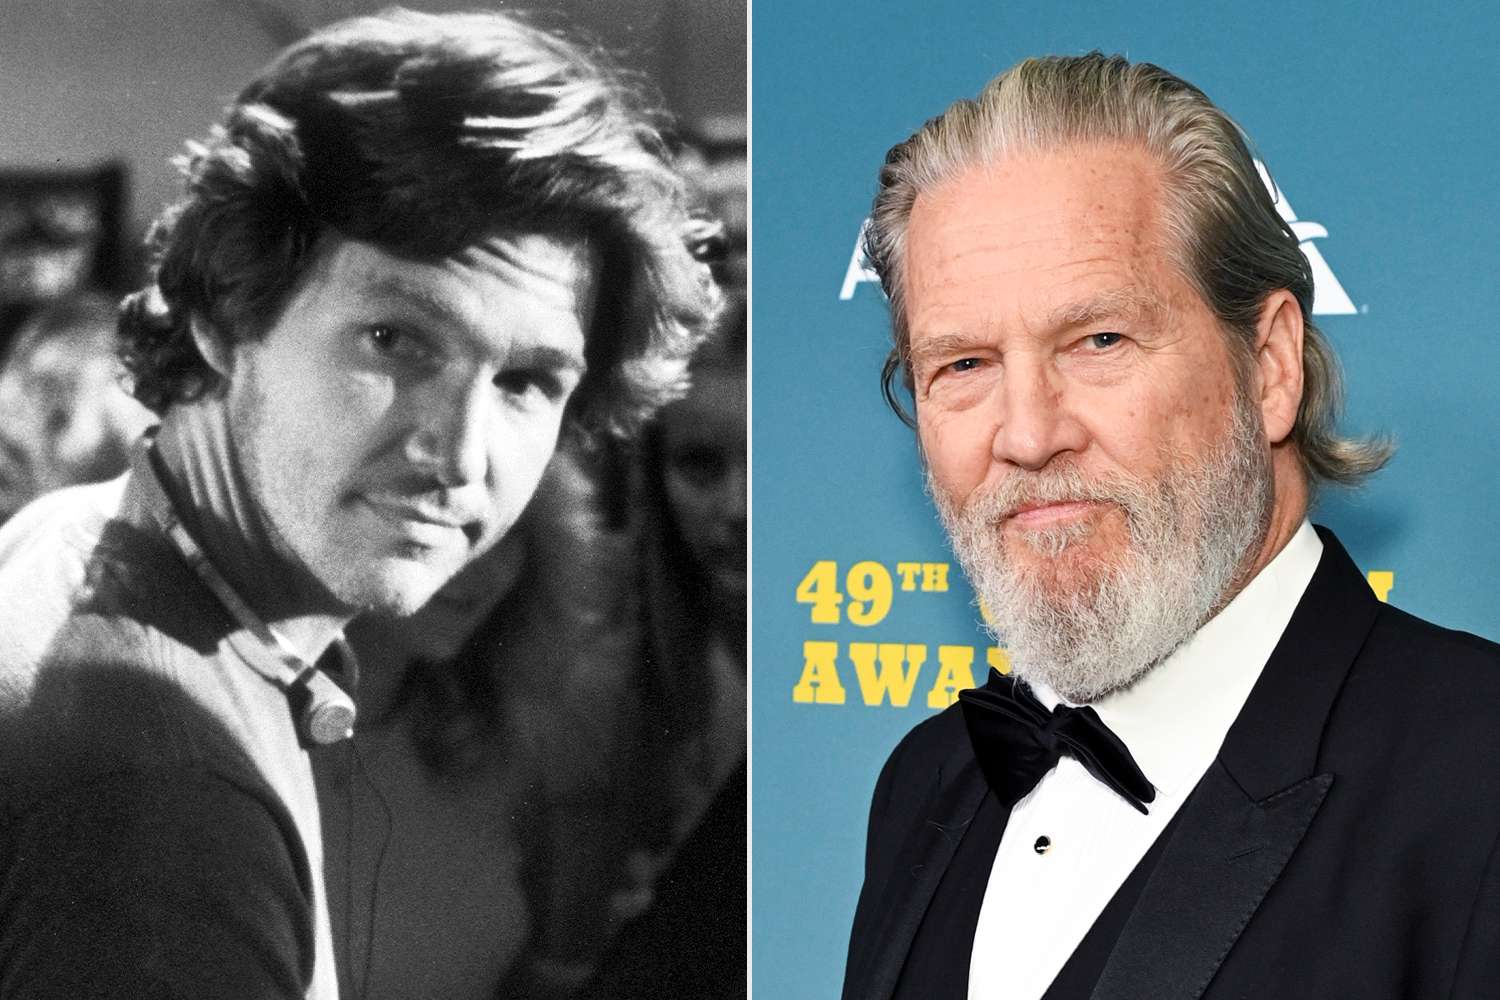 Jeff Bridges 'Returns to the Grid' in New 'Tron' Sequel, Over 40 Years After Original